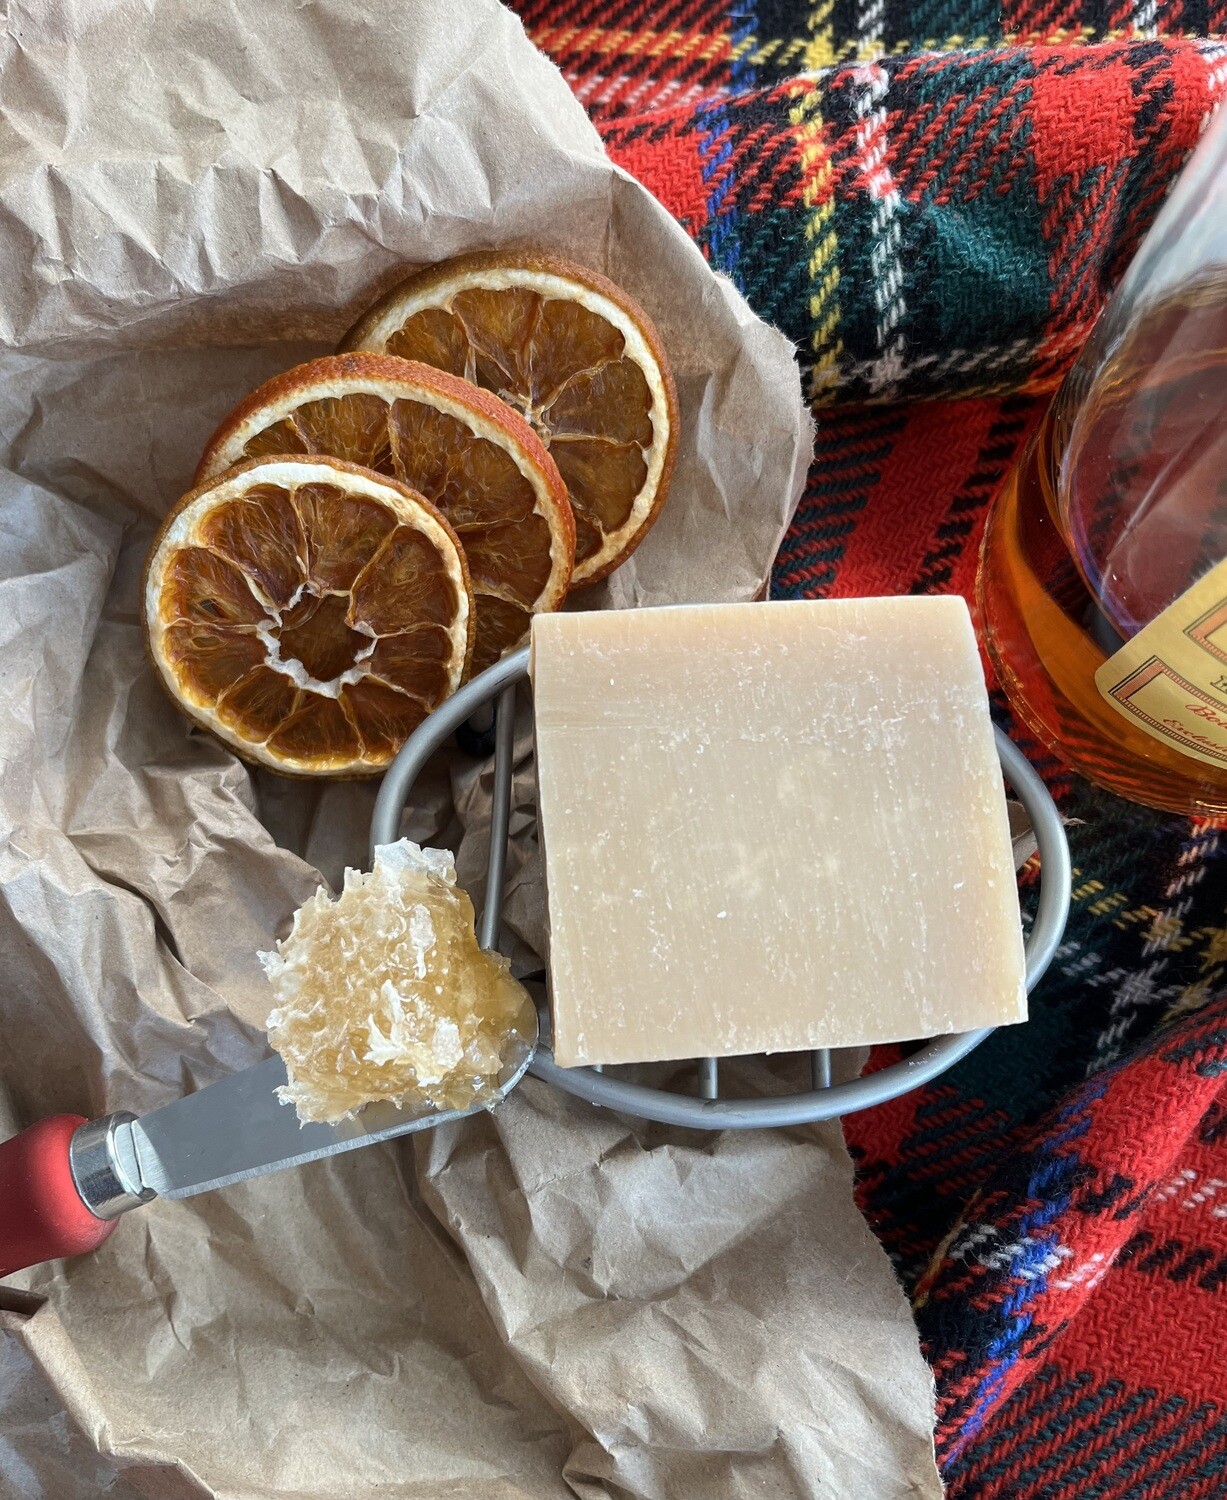 Ugly Pieces: Warm Toddy - Limited Edition Soap
made with brandy and a touch of honey